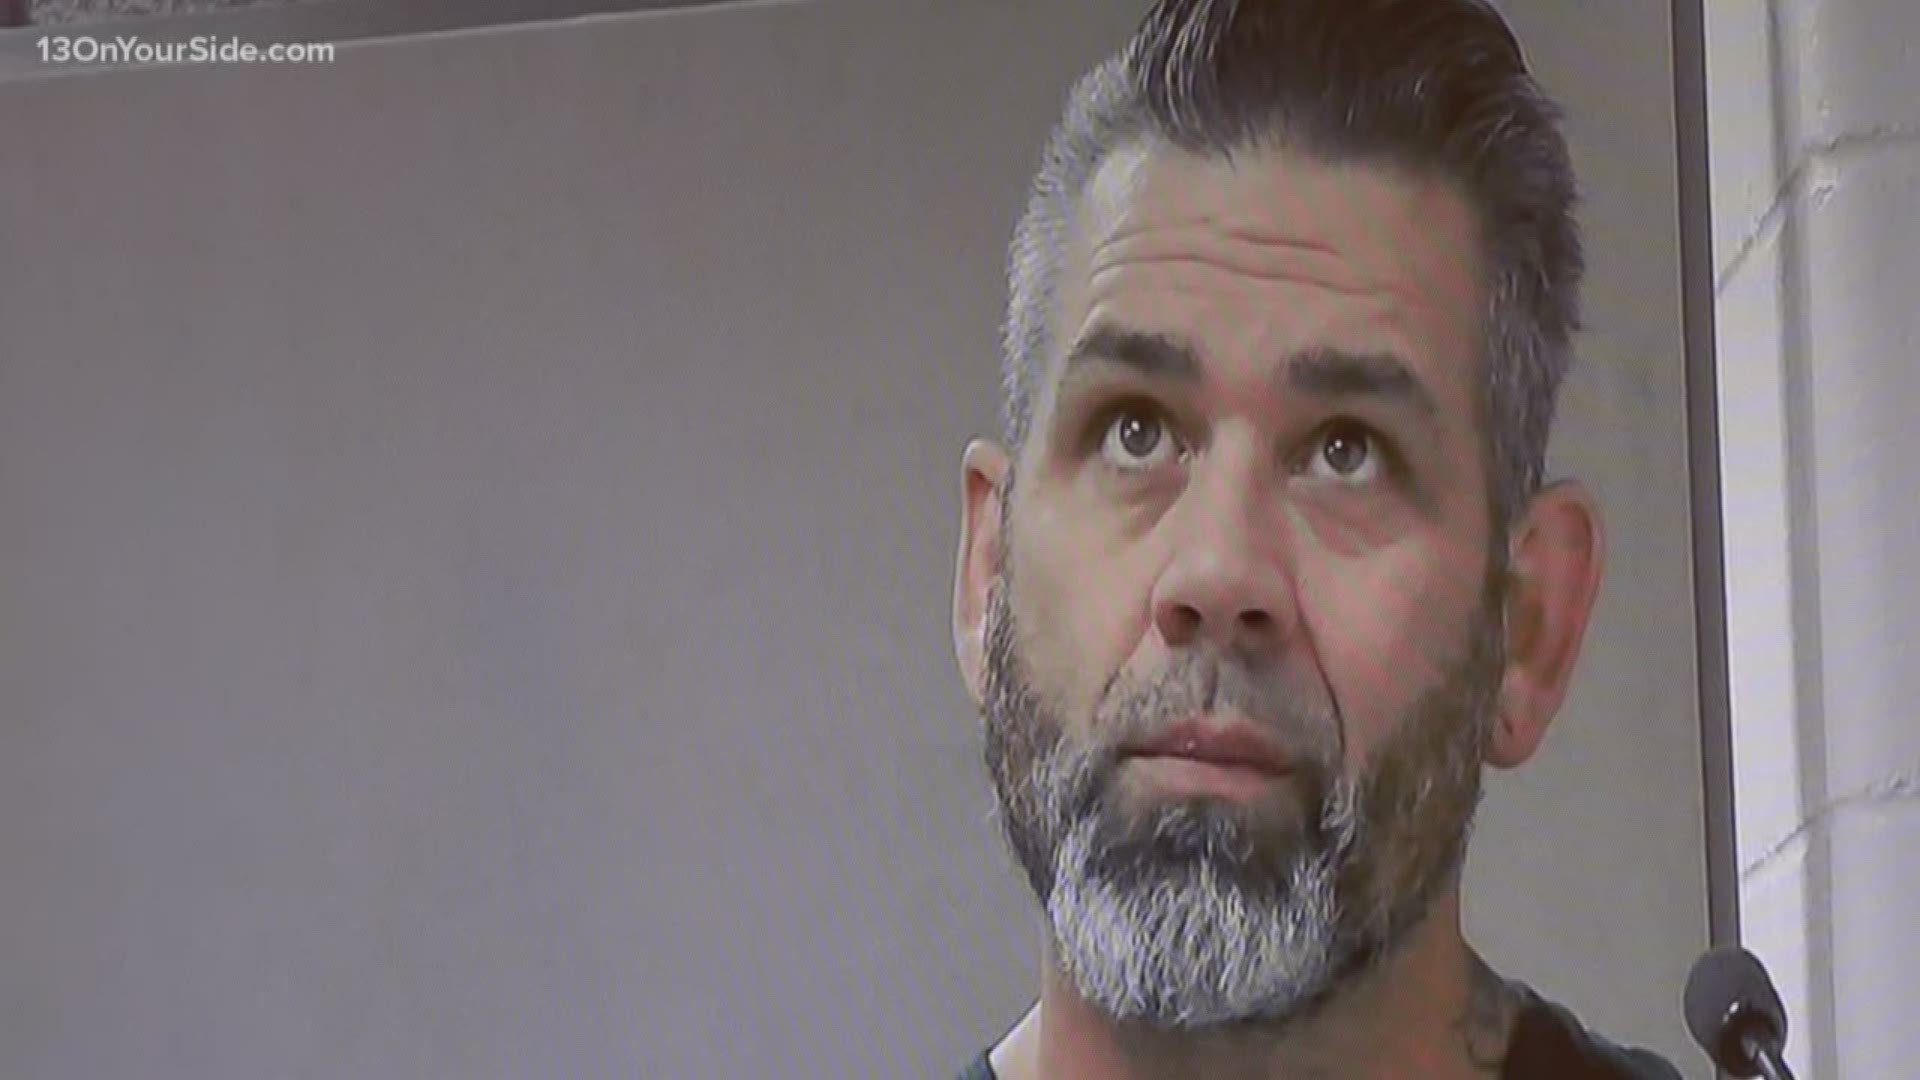 44-year-old Jason McCann was formally charged with an Oct. 19 hit-and-run crash that killed a Grand Rapids couple.